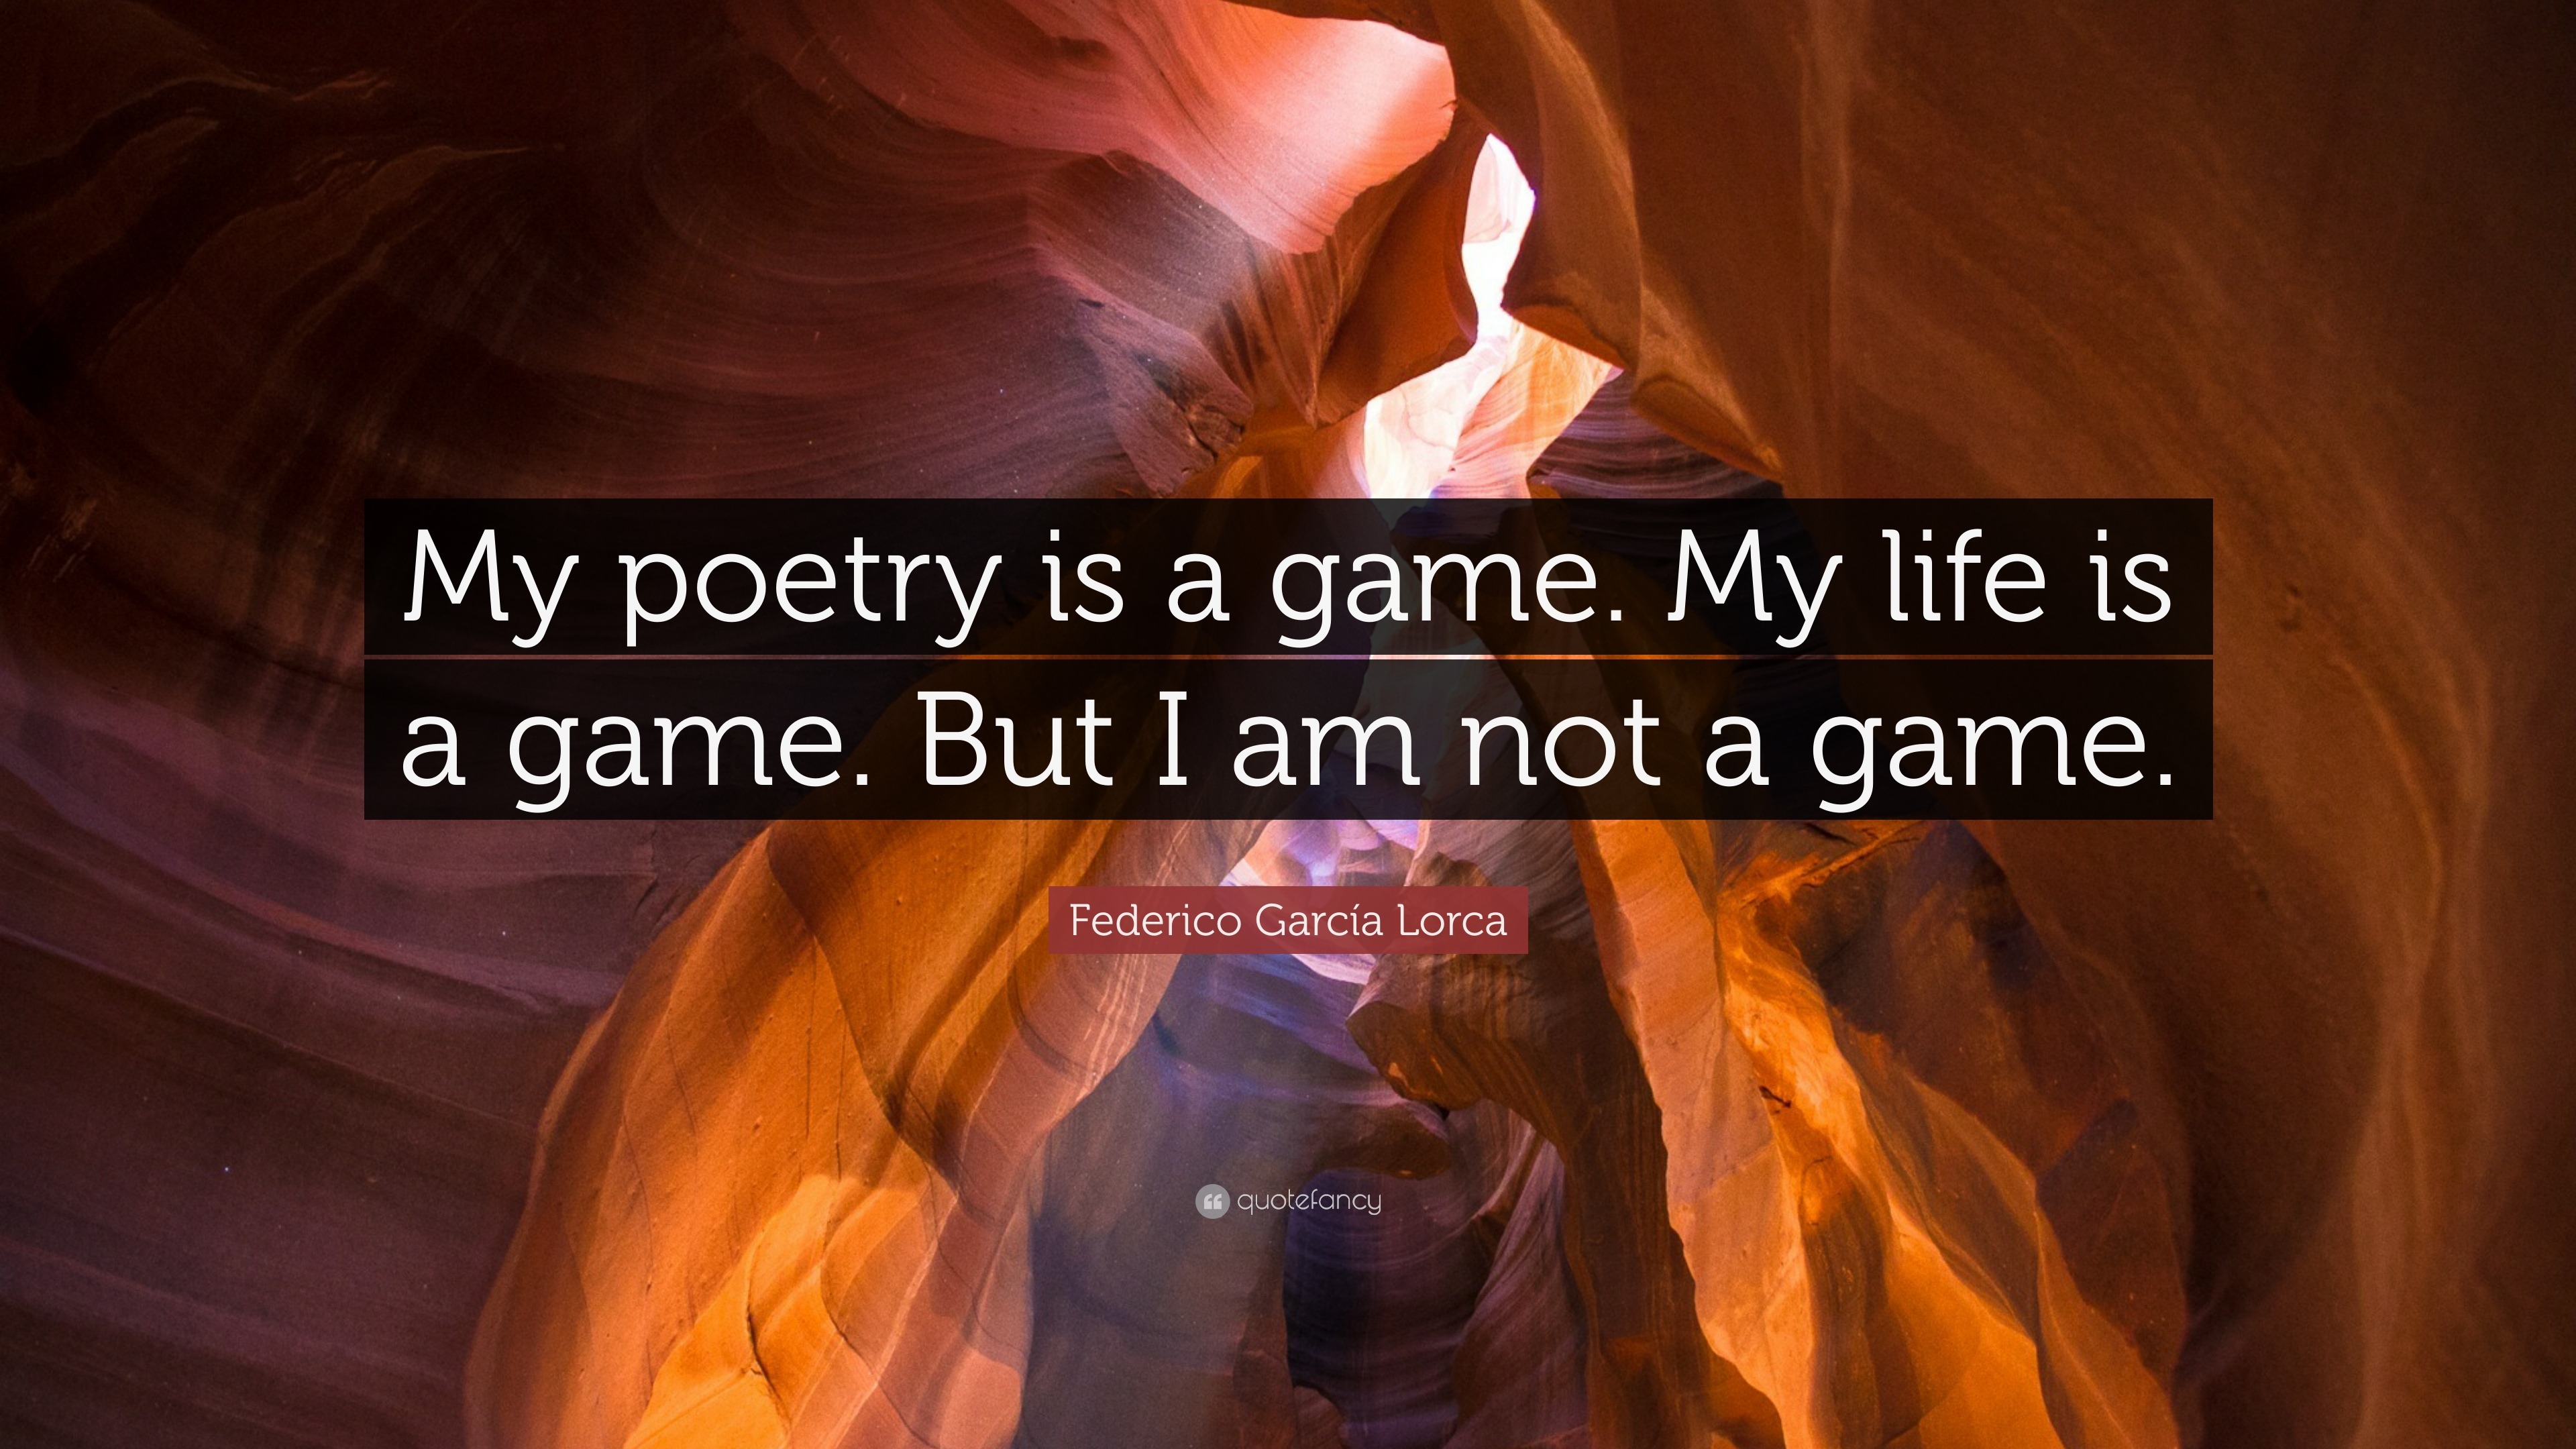 Federico Garcia Lorca Quote My Poetry Is A Game My Life Is A Game But I